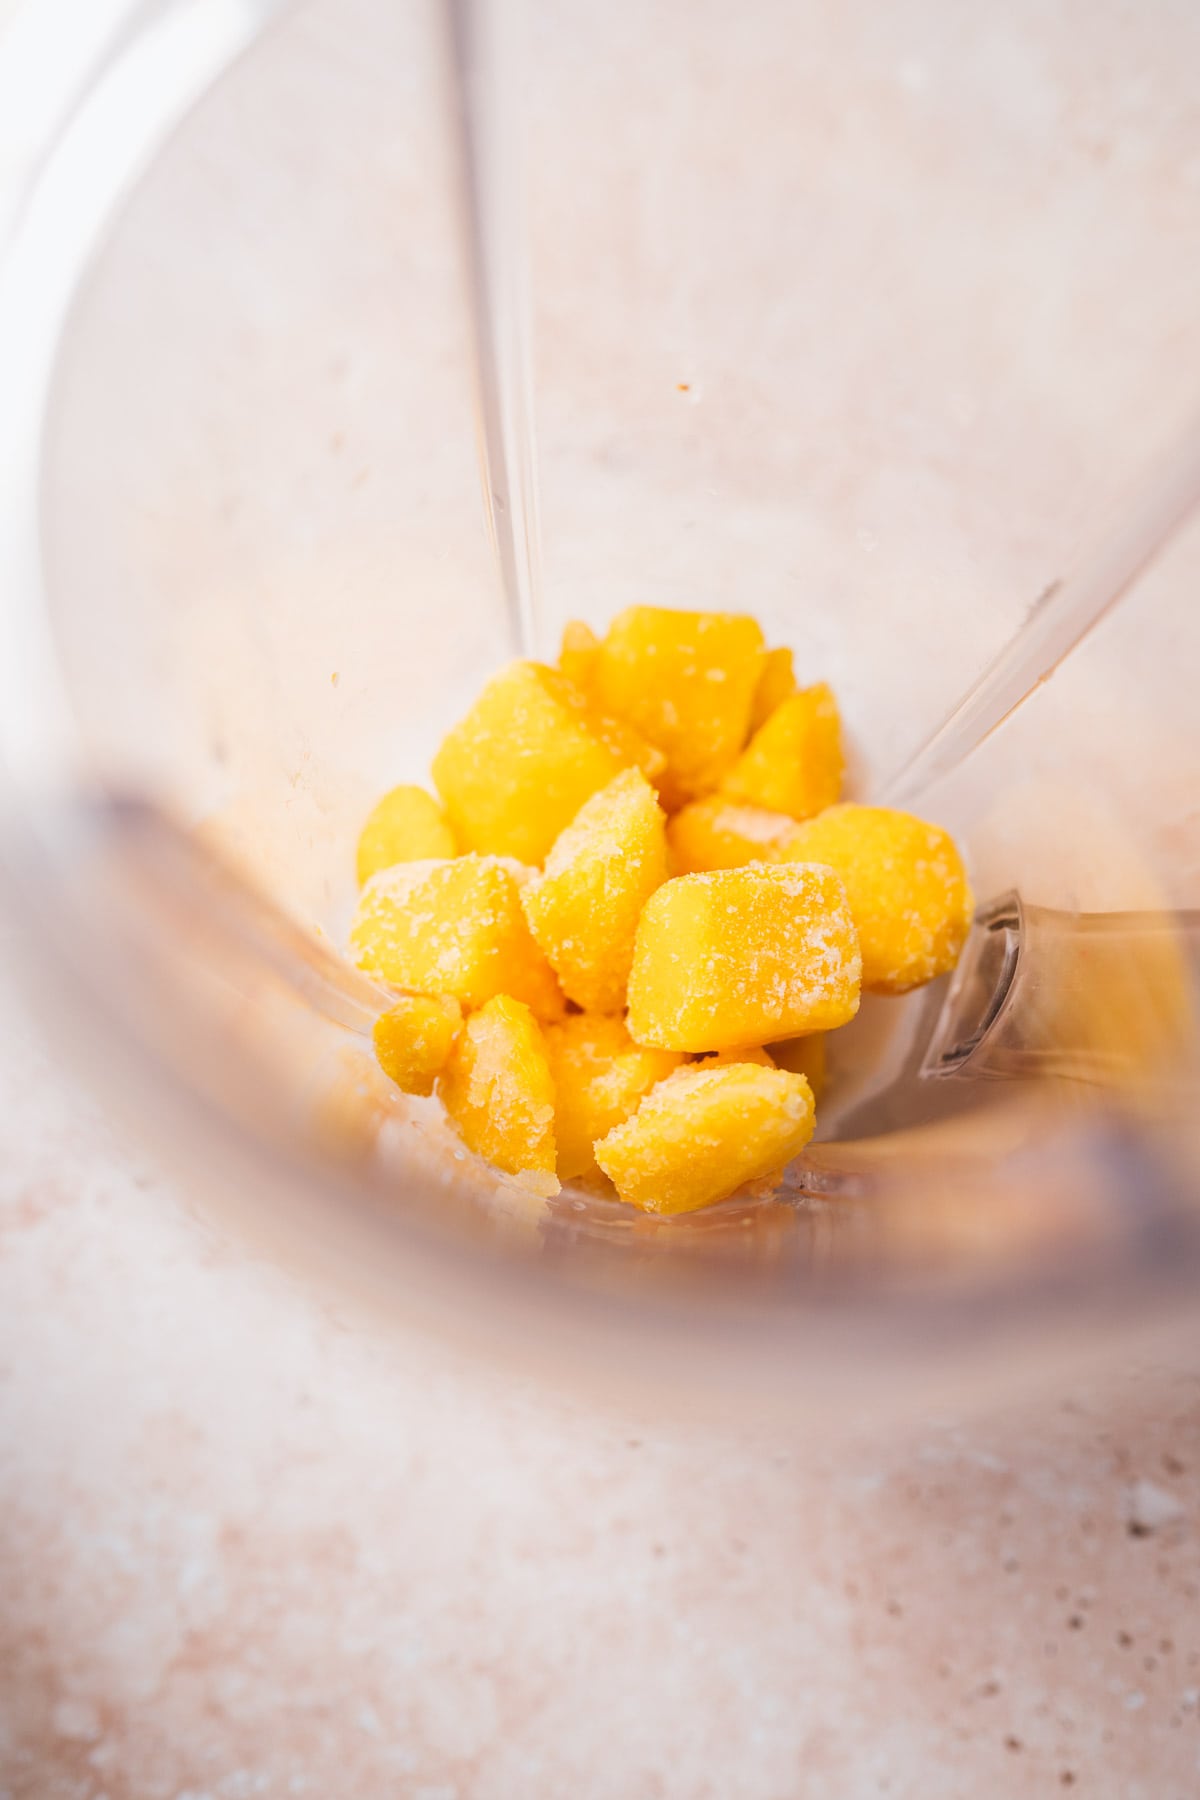 Top view of a blender container filled with frozen mango chunks.